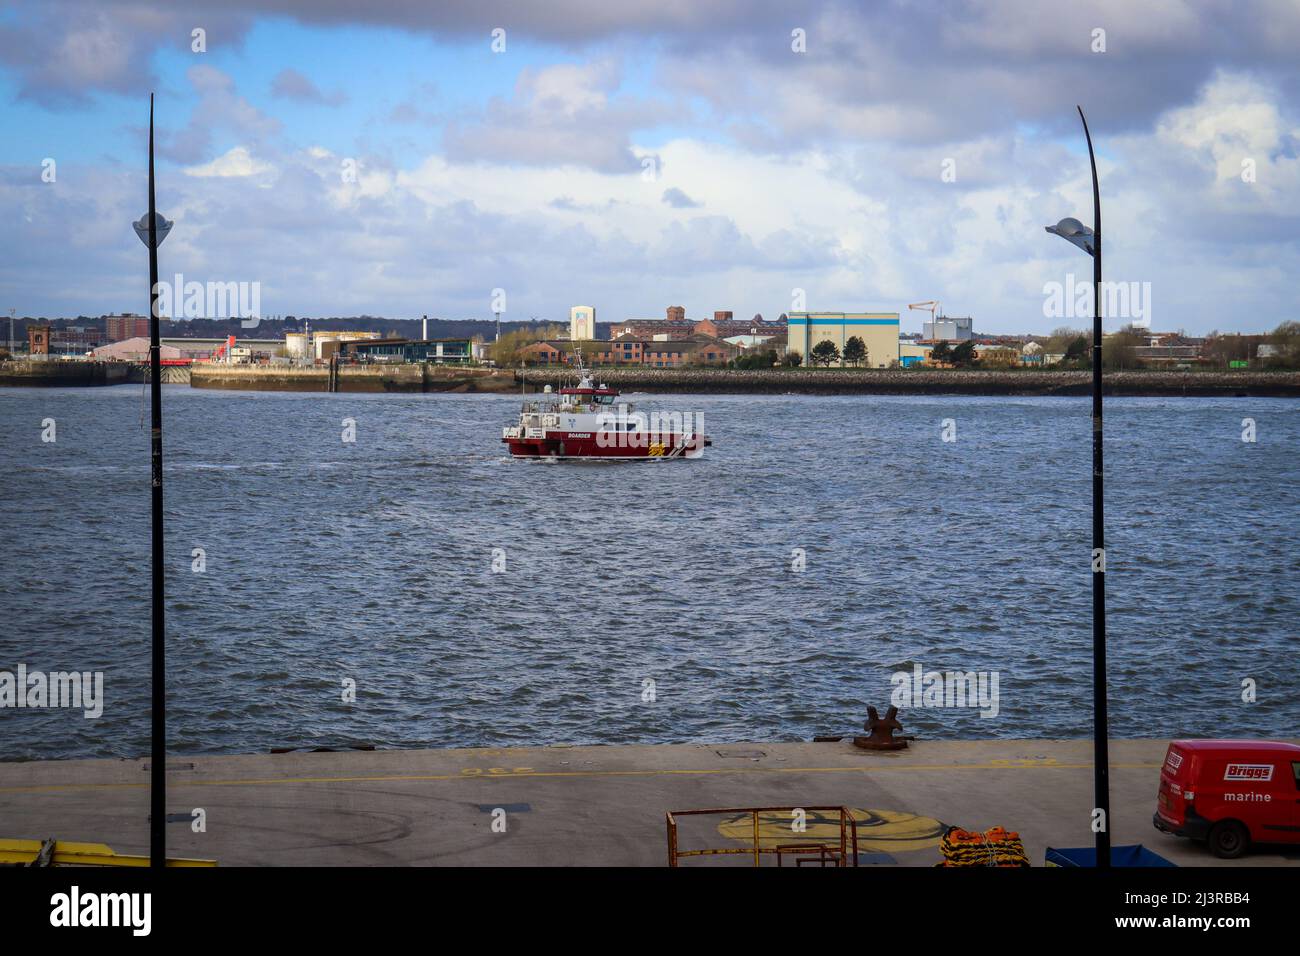 Little boat on the River Mersey Stock Photo